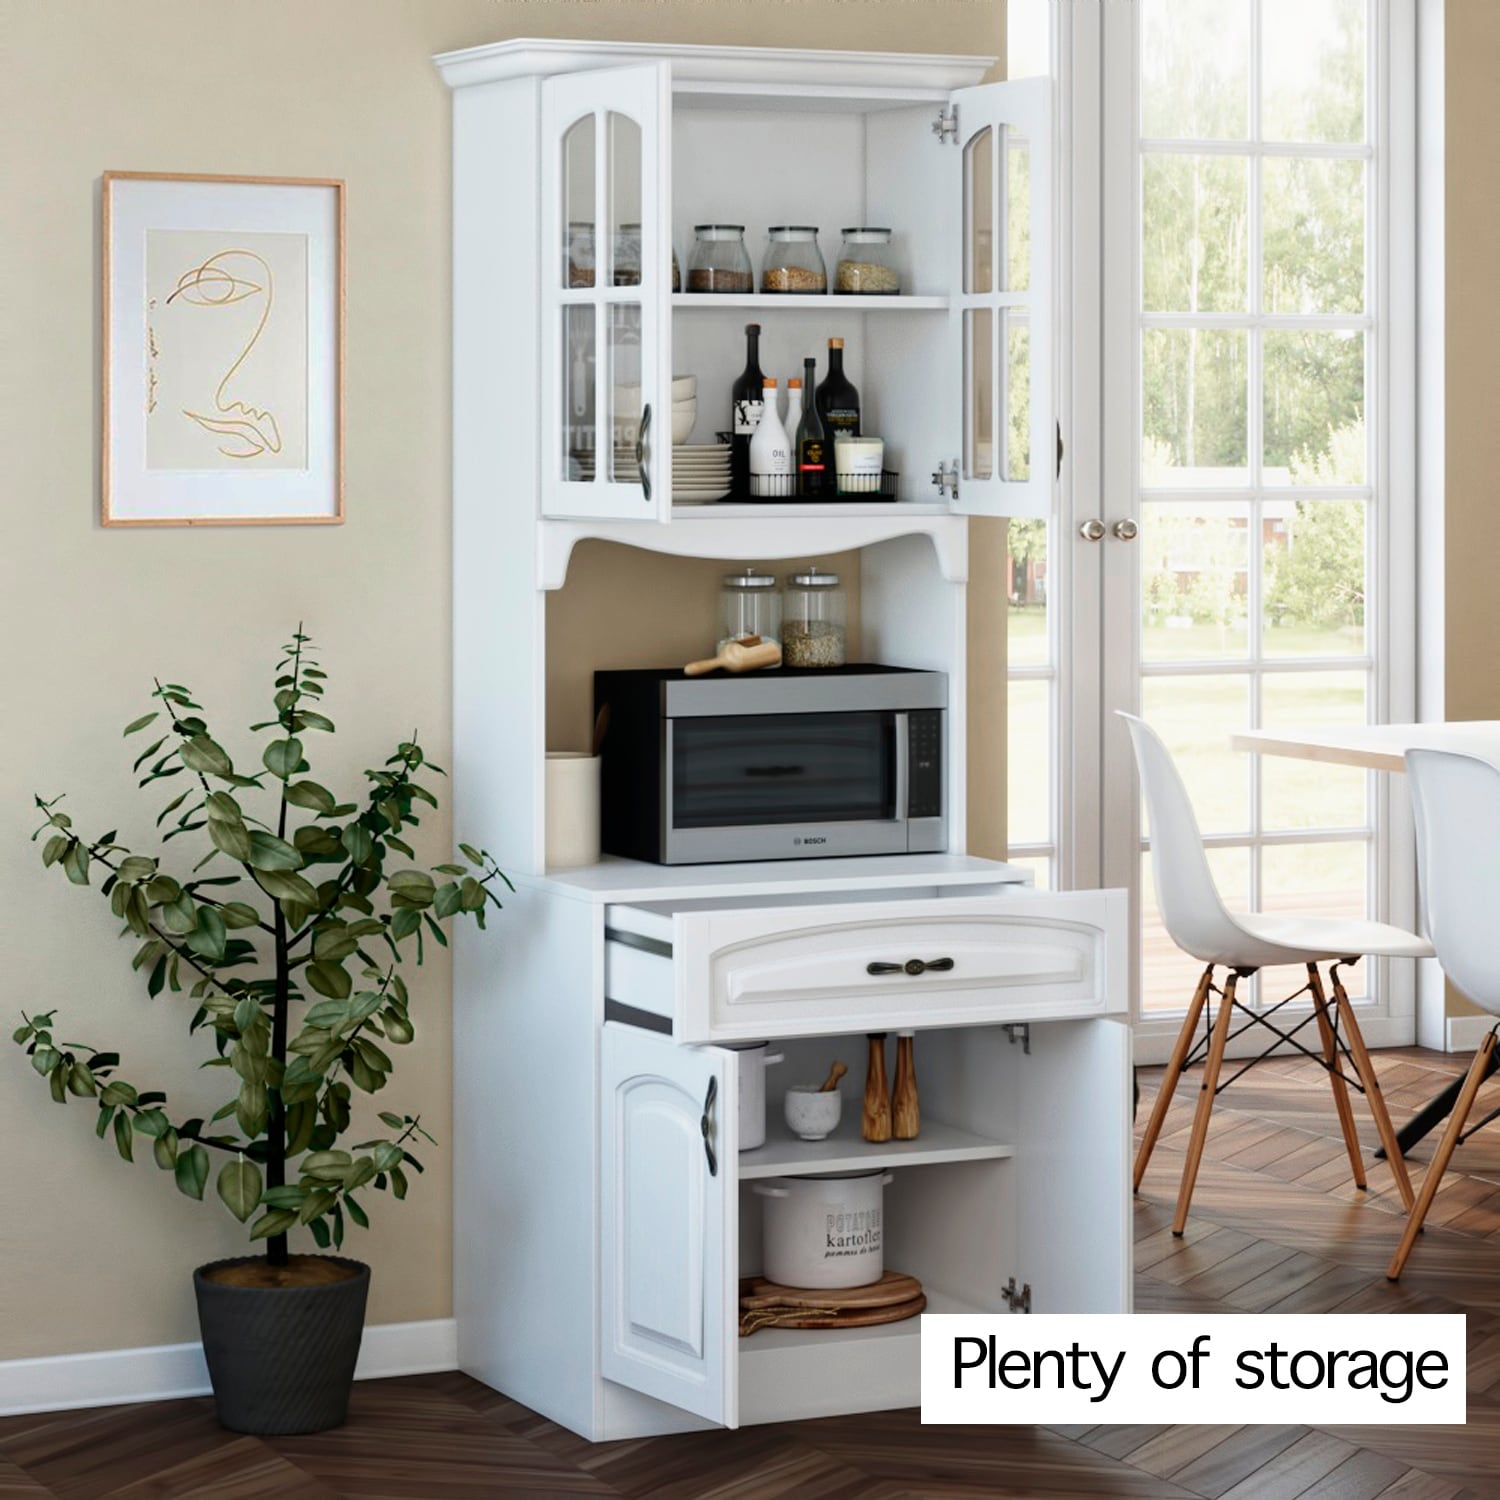 https://ak1.ostkcdn.com/images/products/is/images/direct/0b626bae12ea6a846ebedb85c3c7413c55ad119b/Living-Skog-Galiano-Pantry-Kitchen-Storage-Cabinet-White-For-Microwave.jpg